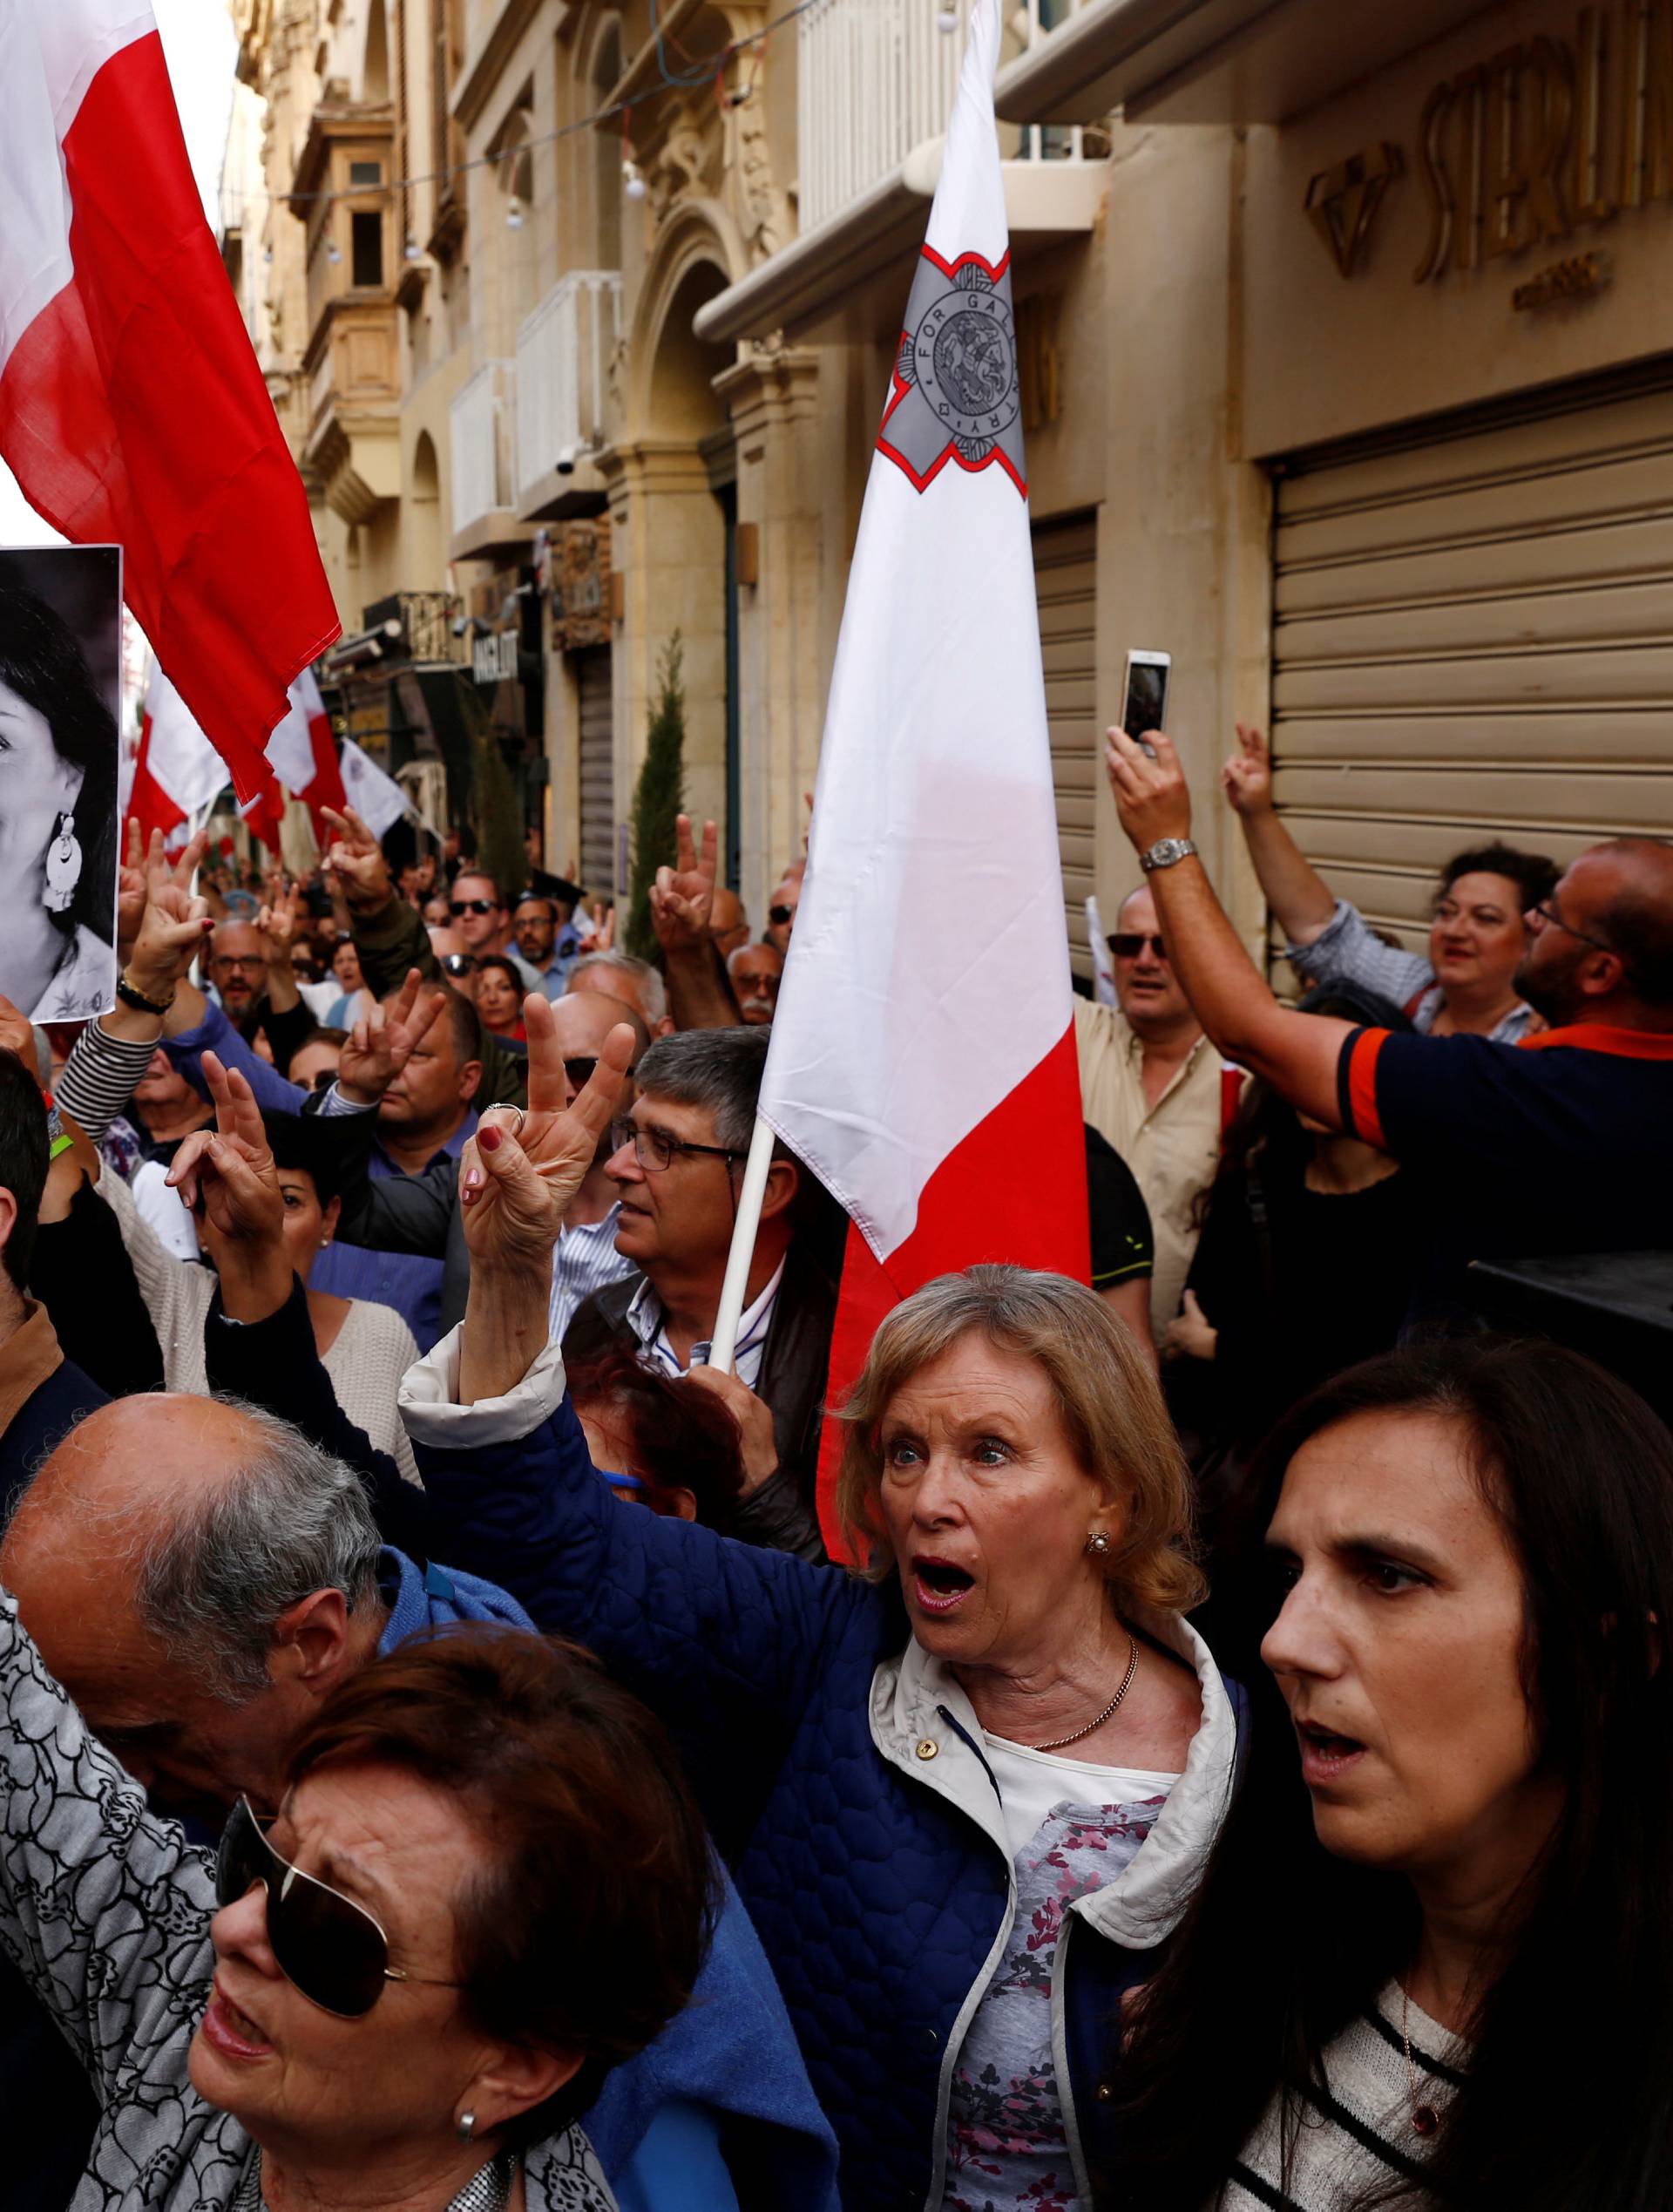 A demonstrator carries a photo of assassinated anti-corruption journalist Daphne Caruana Galizia as others sing the national anthem at the end of a protest against government corruption revealed by the Daphne Project, in Valletta